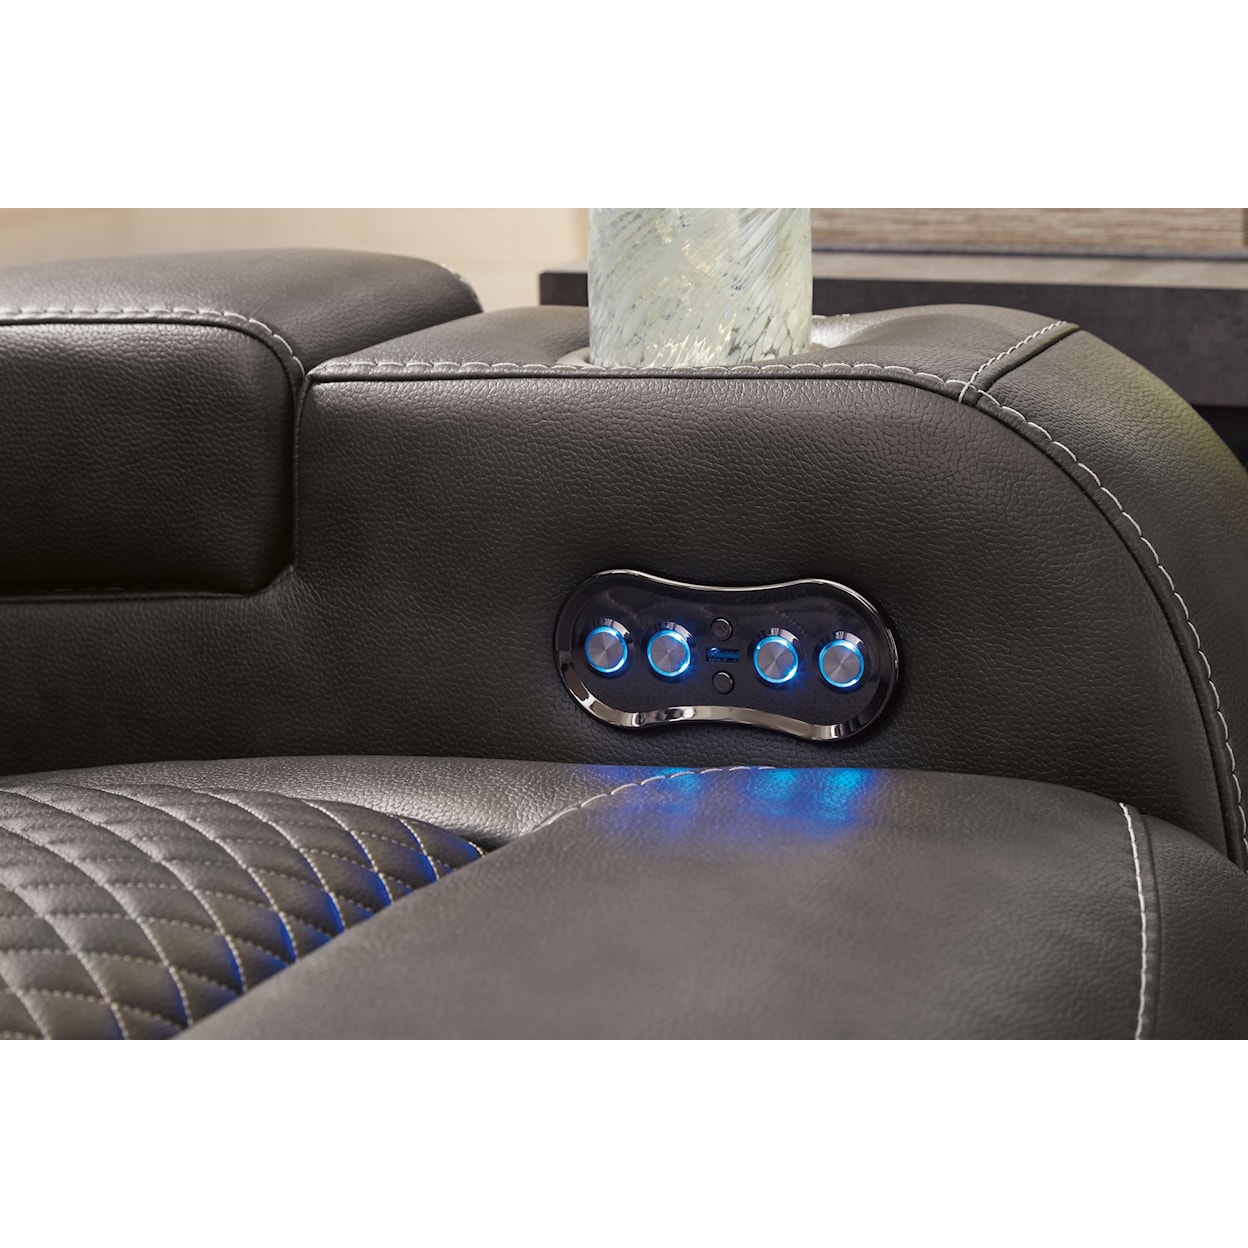 Signature Fyne-Dyme Power Reclining Loveseat With Console